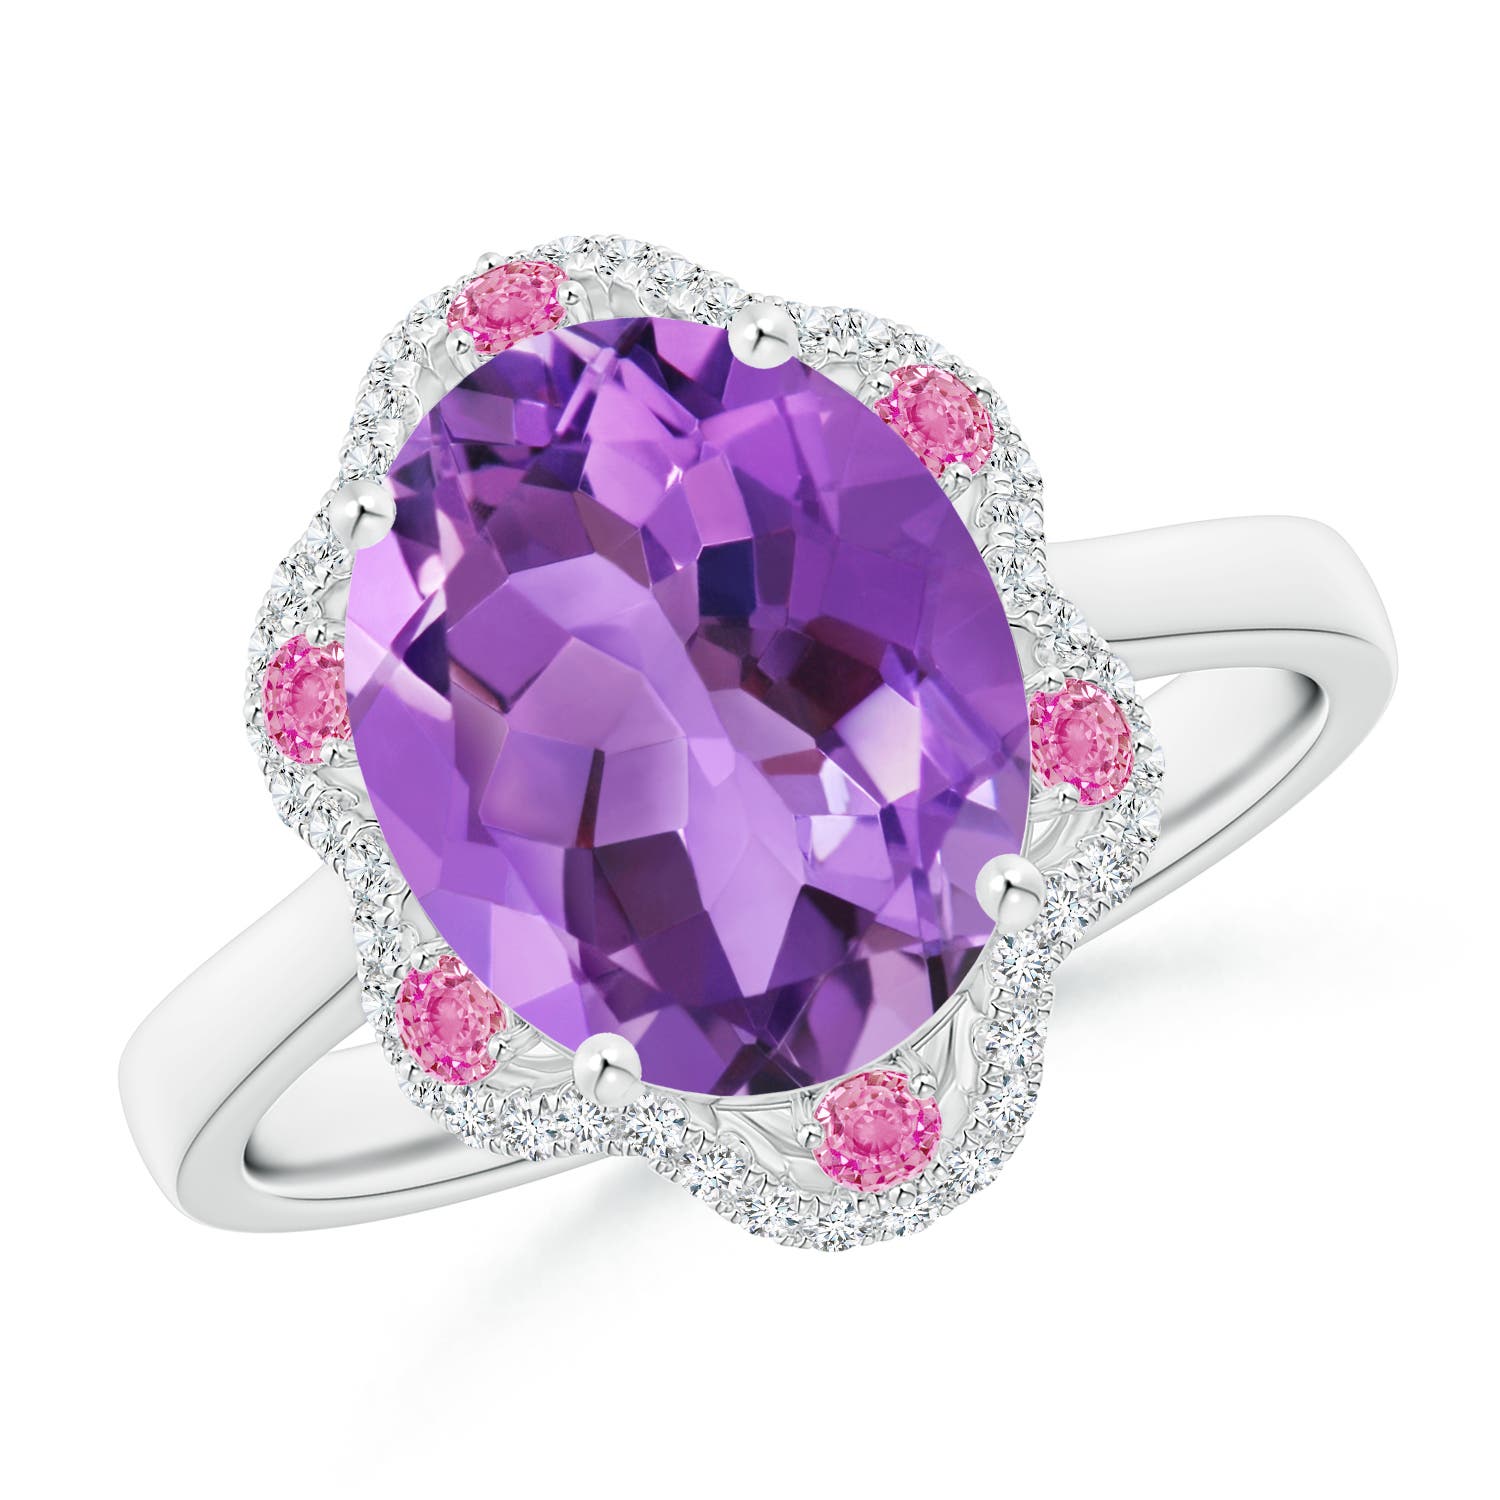 AA - Amethyst / 3.48 CT / 14 KT White Gold